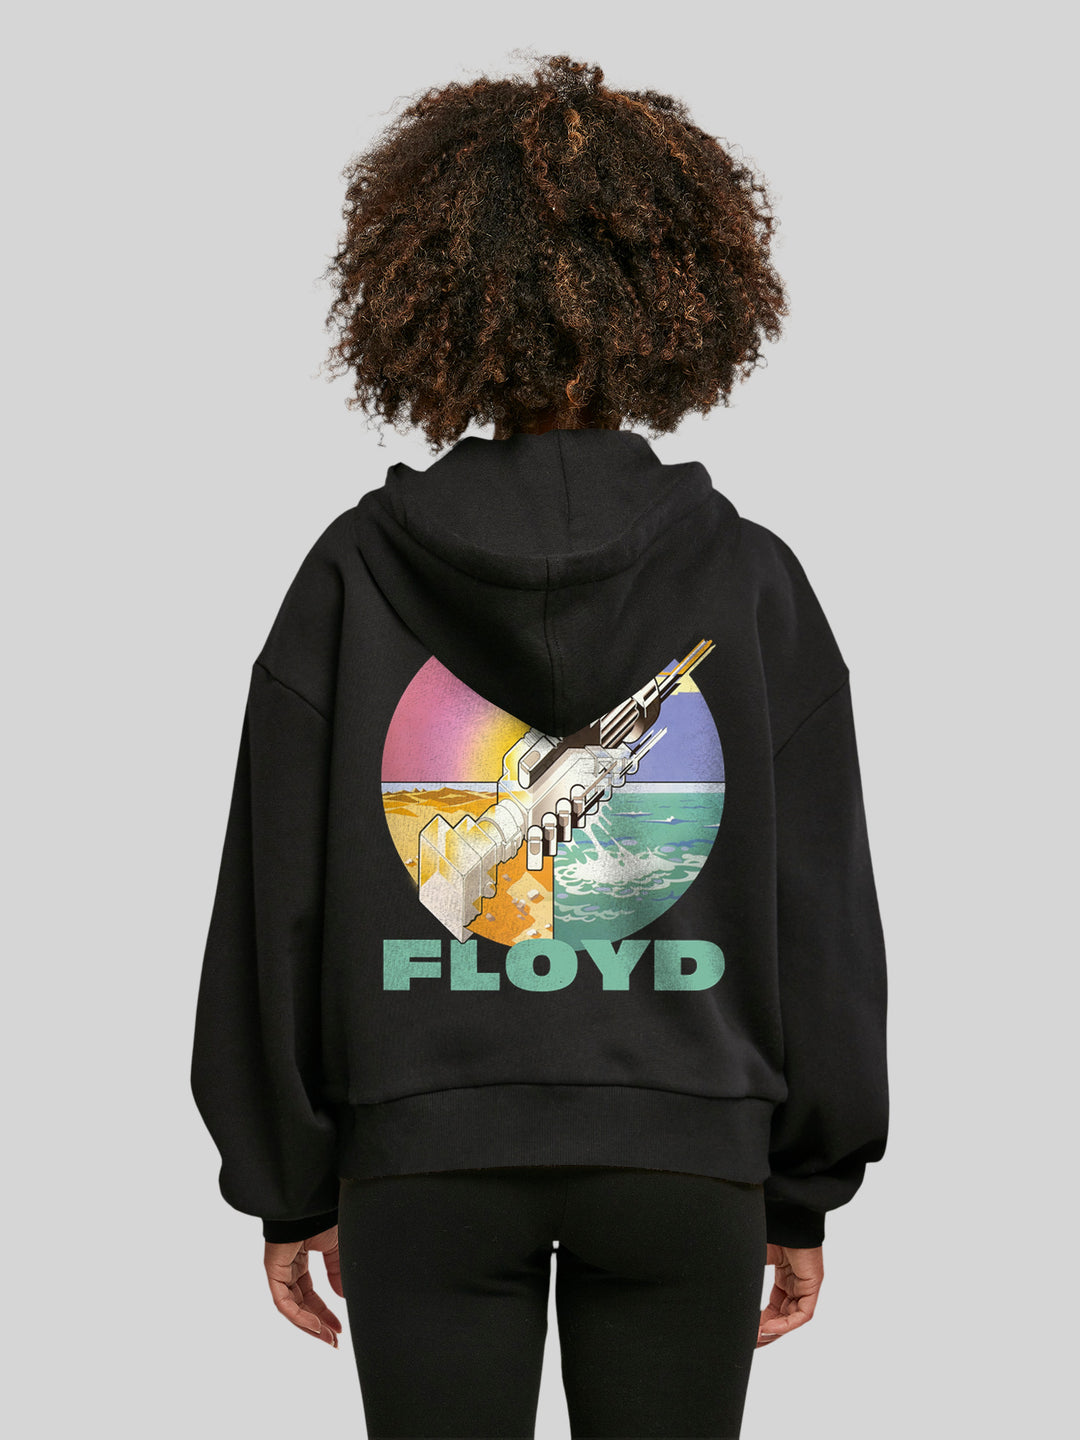 Pink Floyd Wish You Were Here with Ladies Organic Oversized Hoody